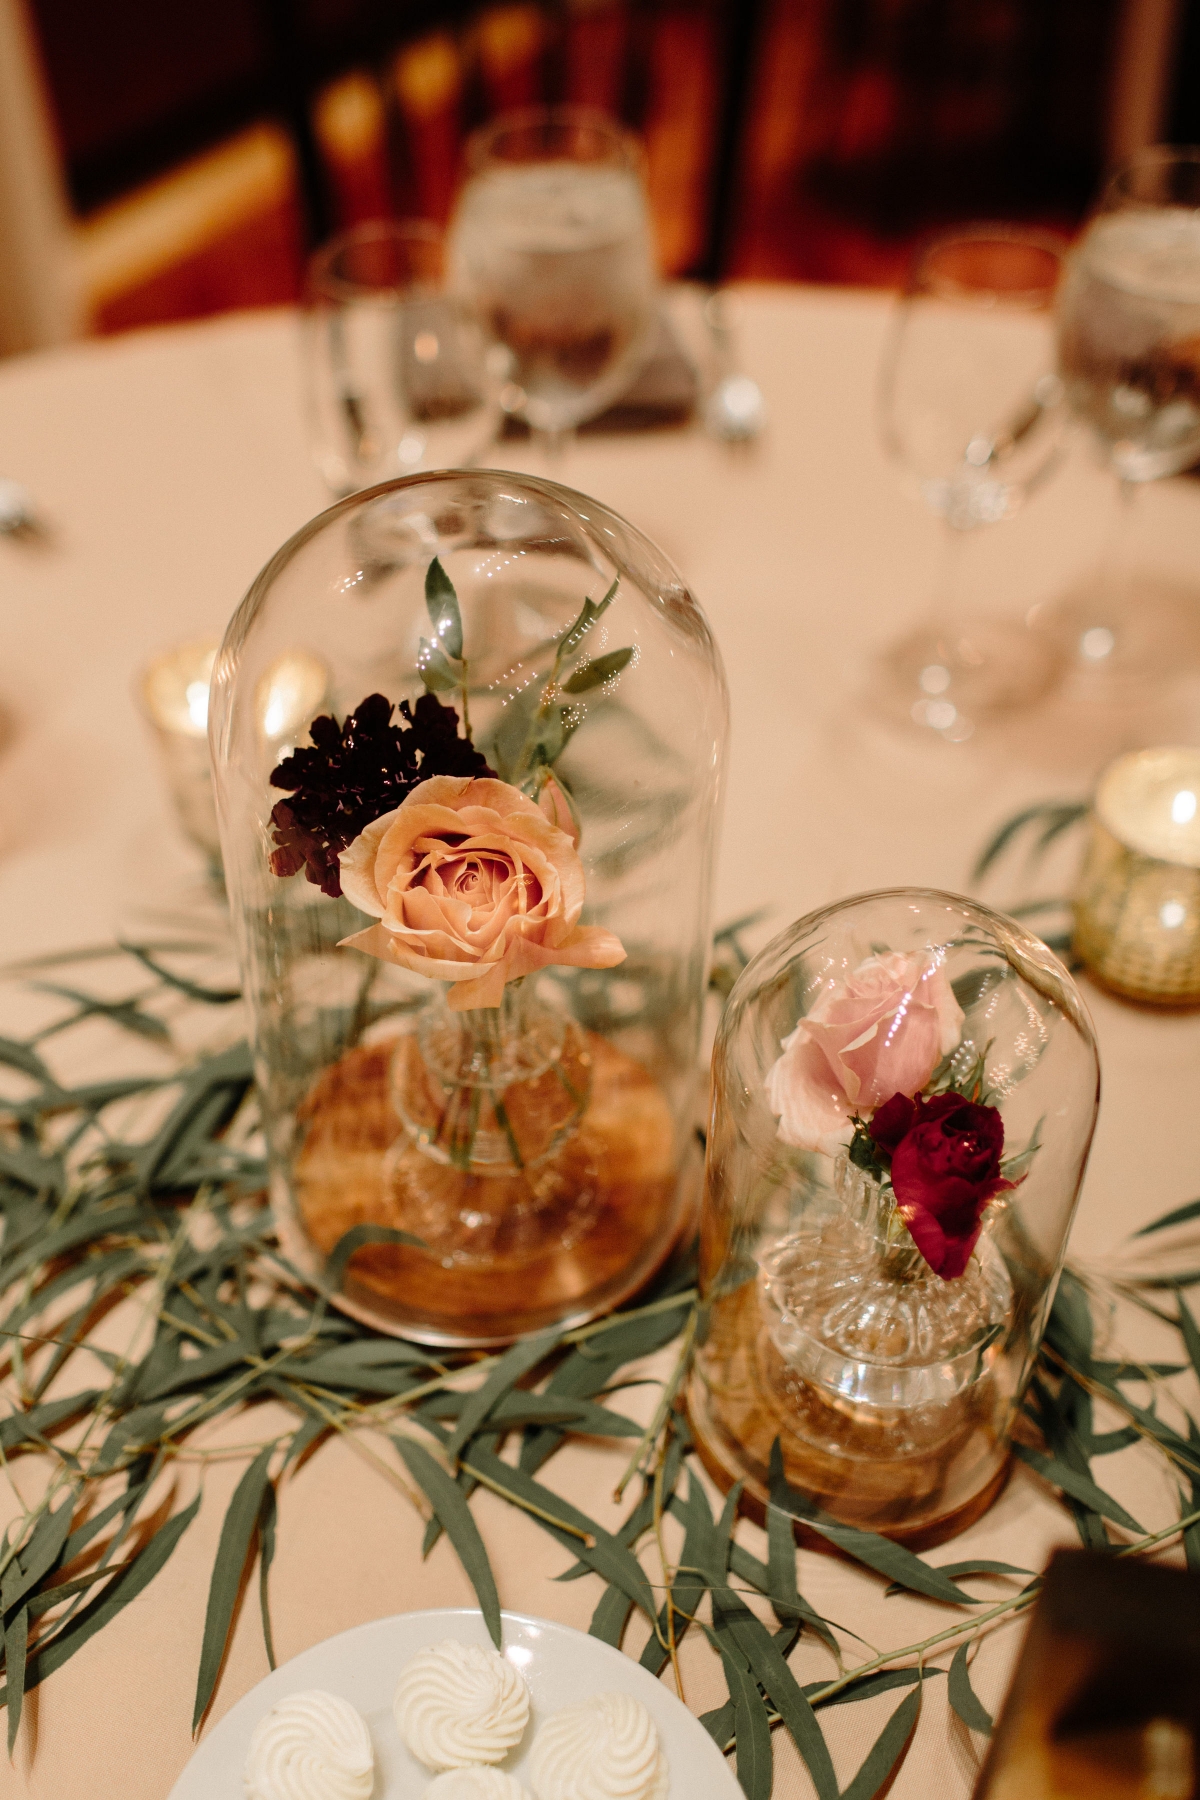 Centerpieces with Glass Covers